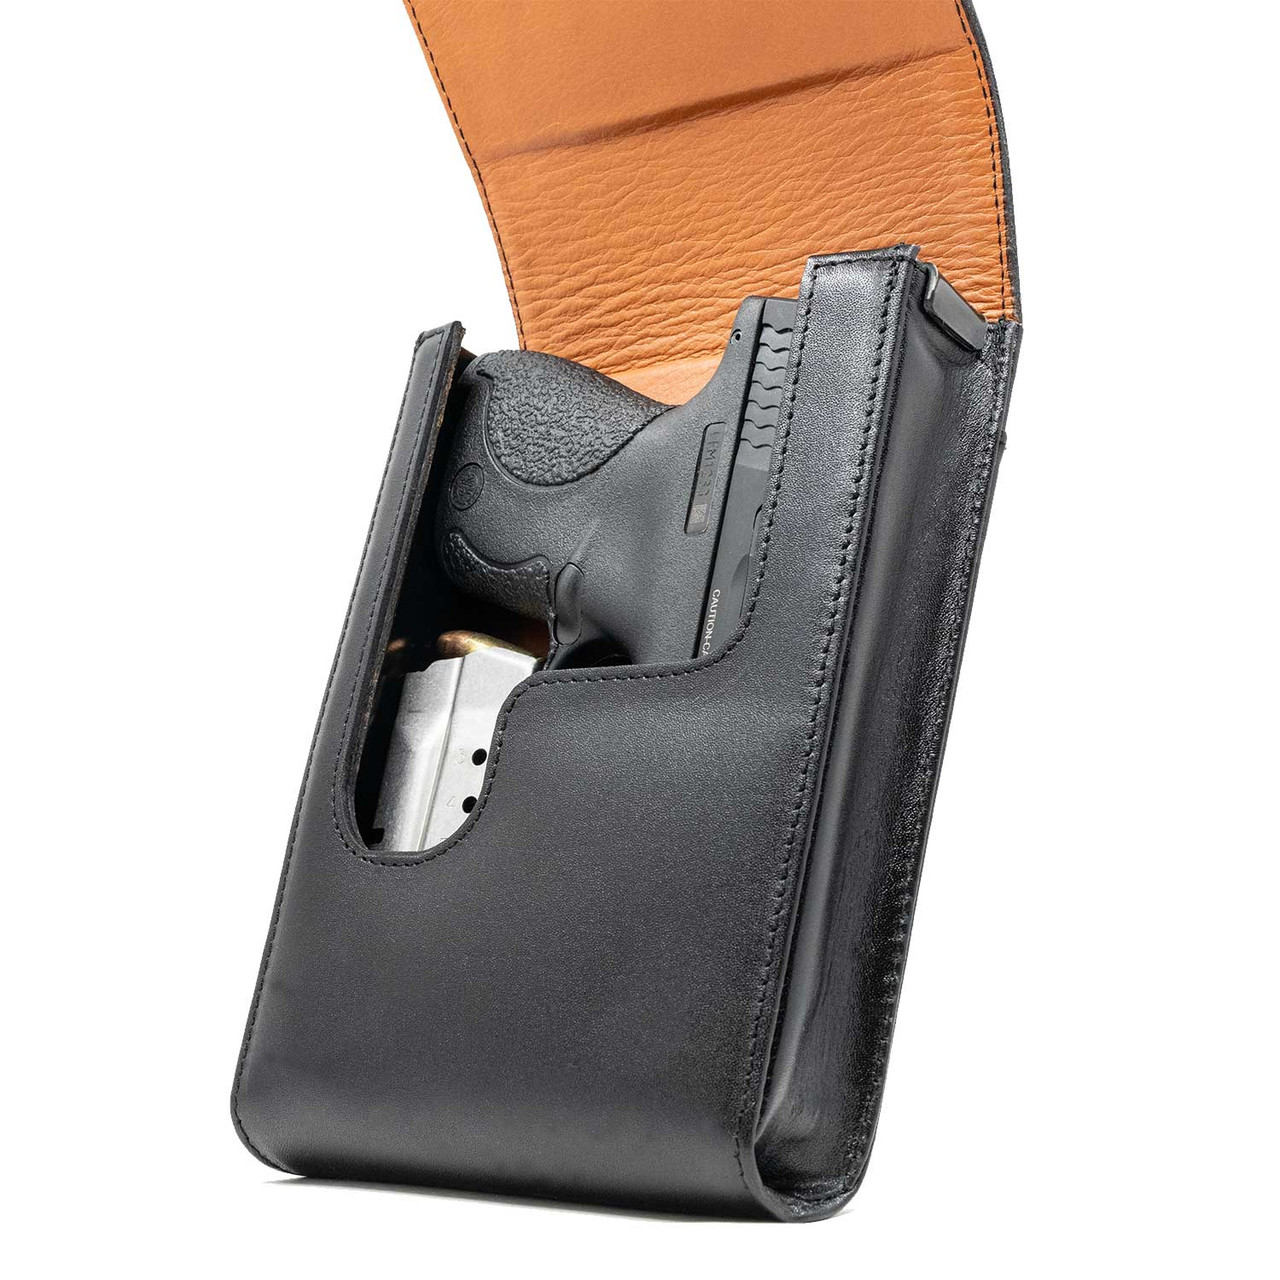 The Springfield XDS 40 Xtra Mag Black Leather Holster